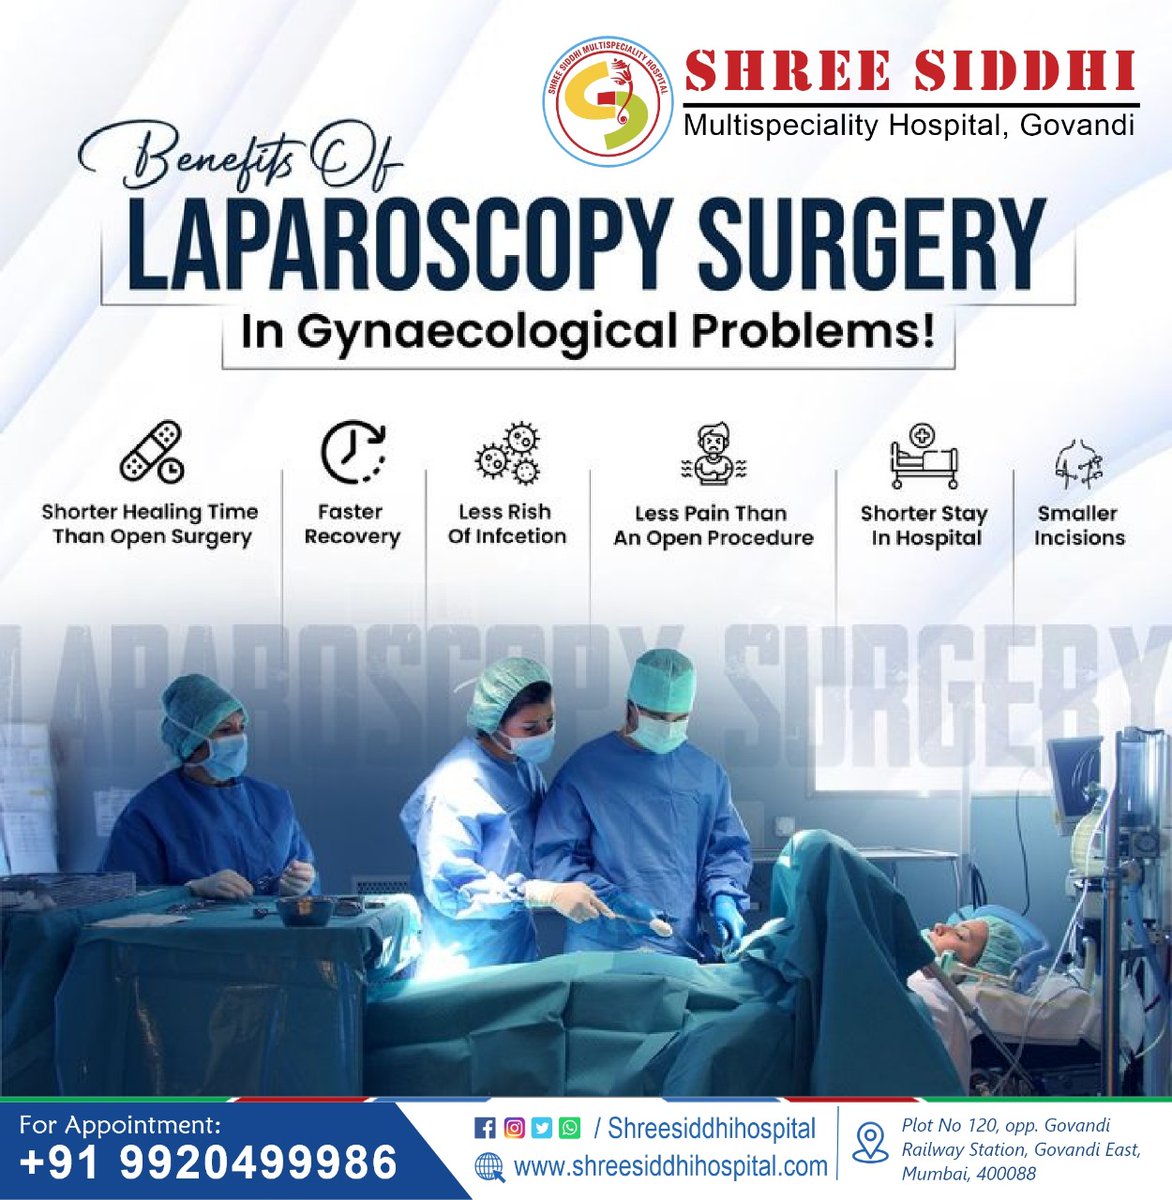 Benefits Of LAPAROSCOPY SURGERY In Gynaecological Problems!
Contact to Shree Siddhi Hospital.
9920499986
shreesiddhihospital.com

#hospital #laparoscopicsurgery #surgery #doctors #surgeon #pilestreatment #govandi